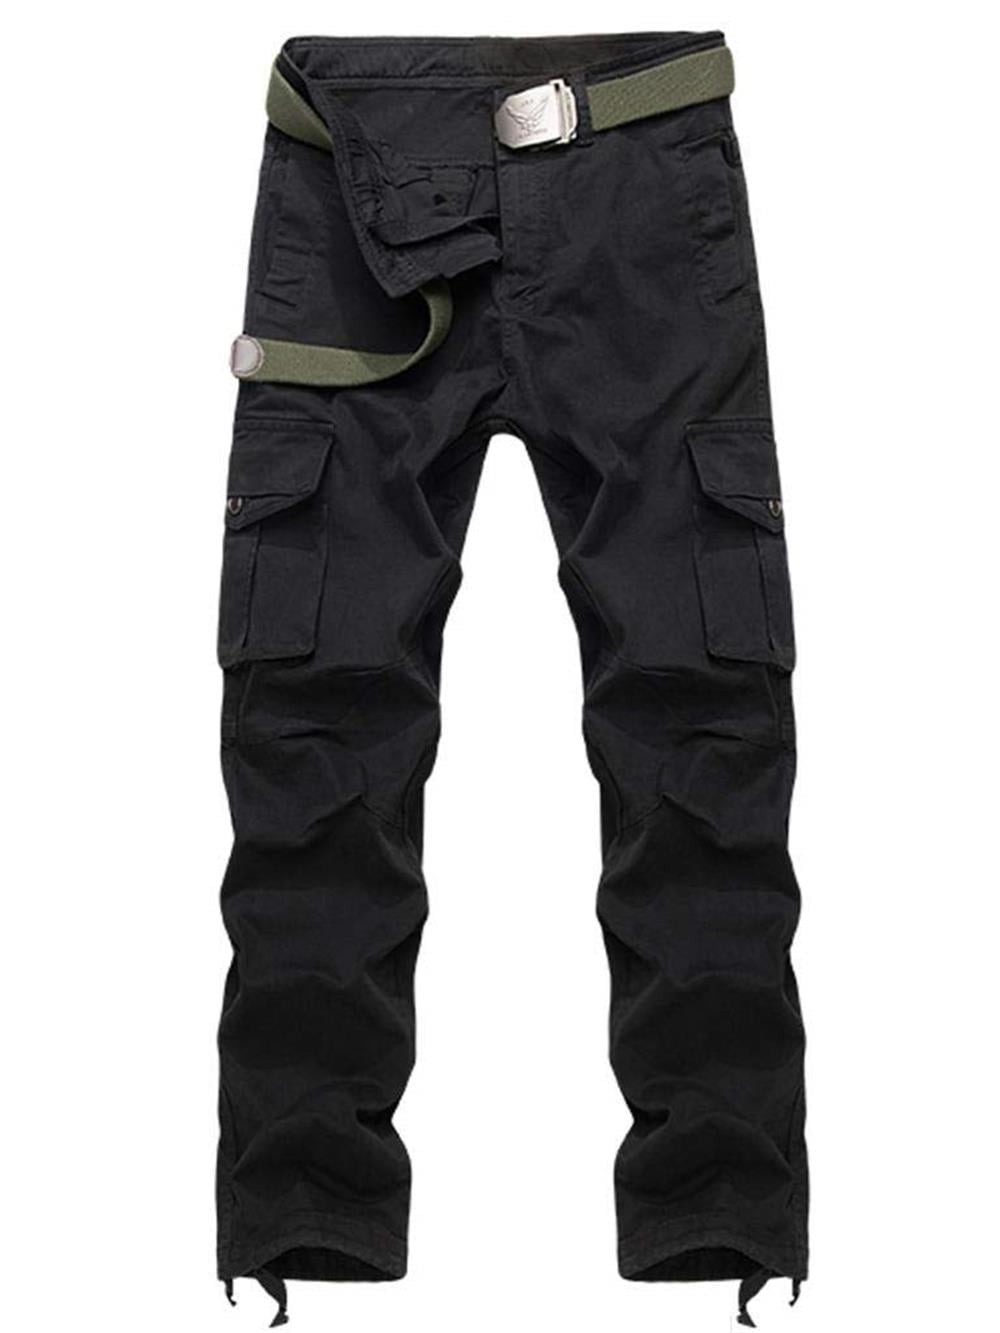 TRGPSG Men's Cotton Cargo Pants with Multi Pockets Outdoor Work Pants ...